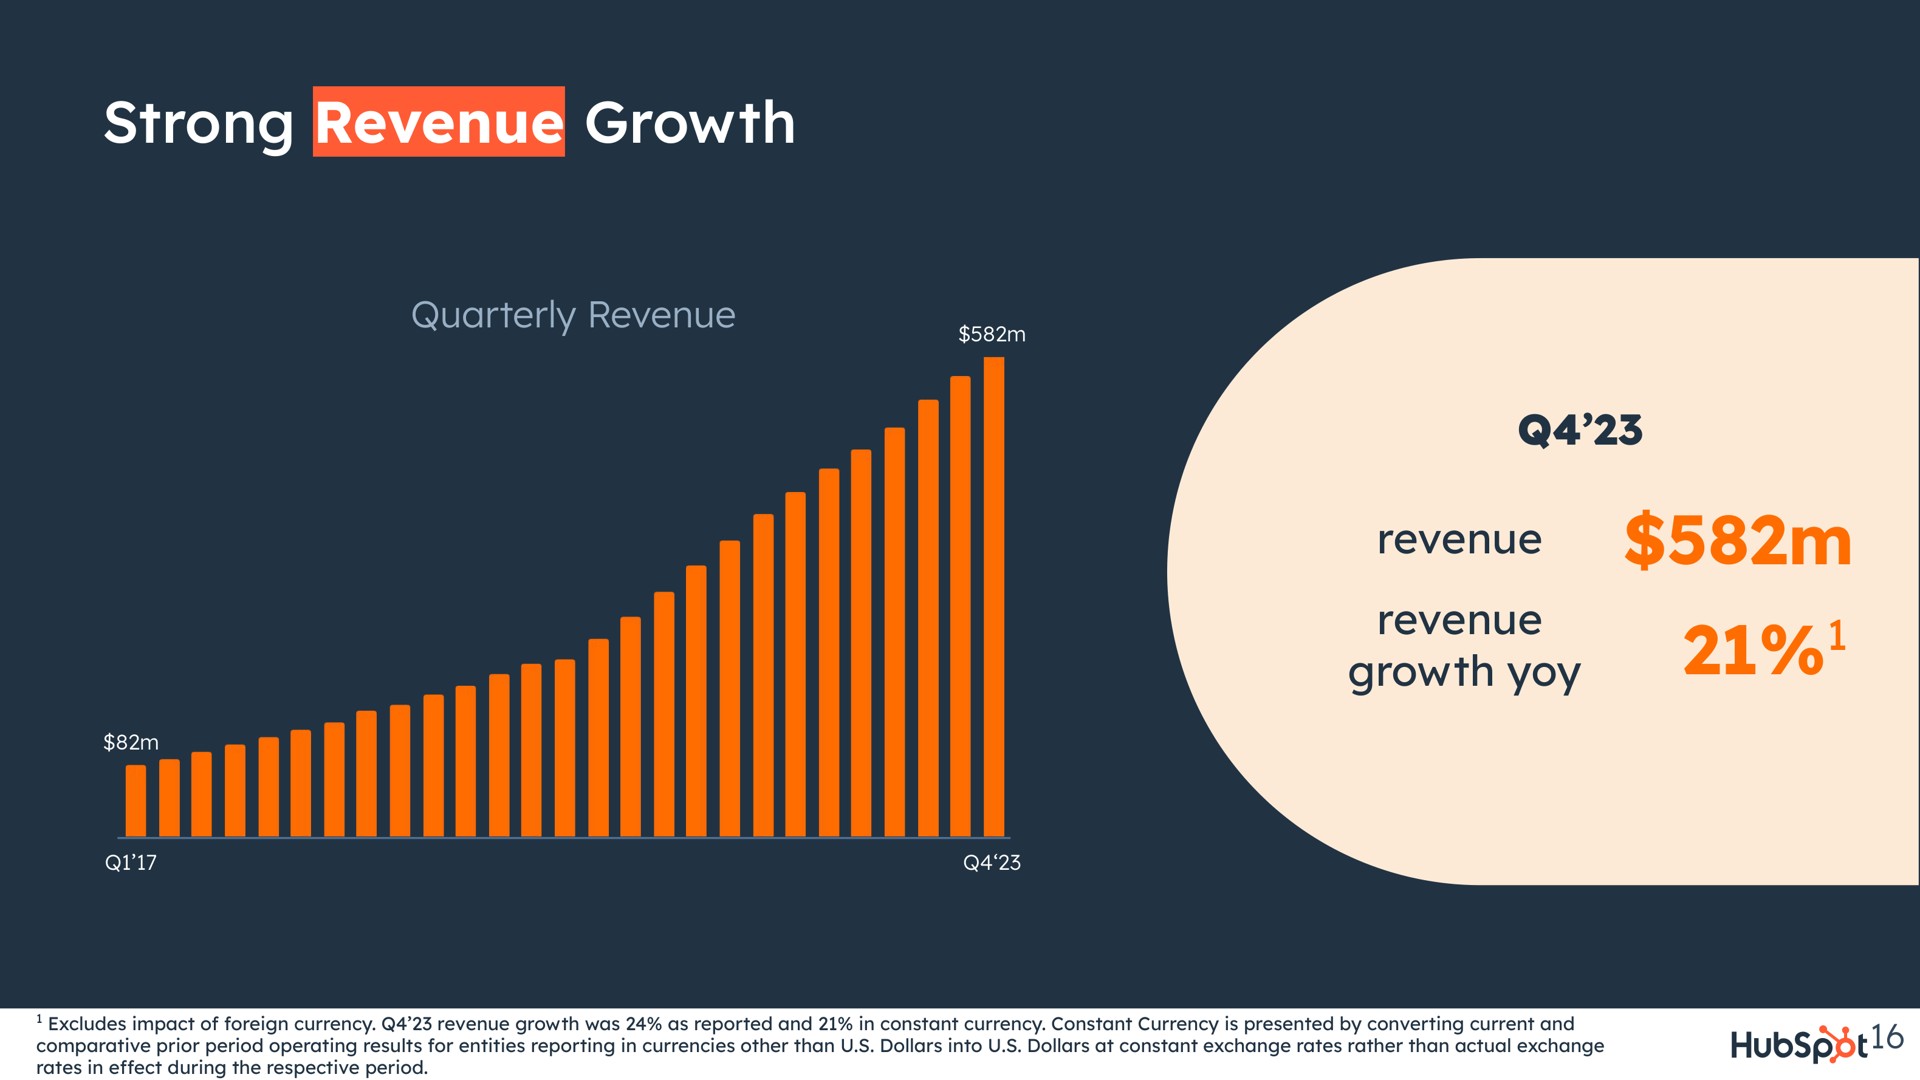 strong revenue growth yoy | Hubspot